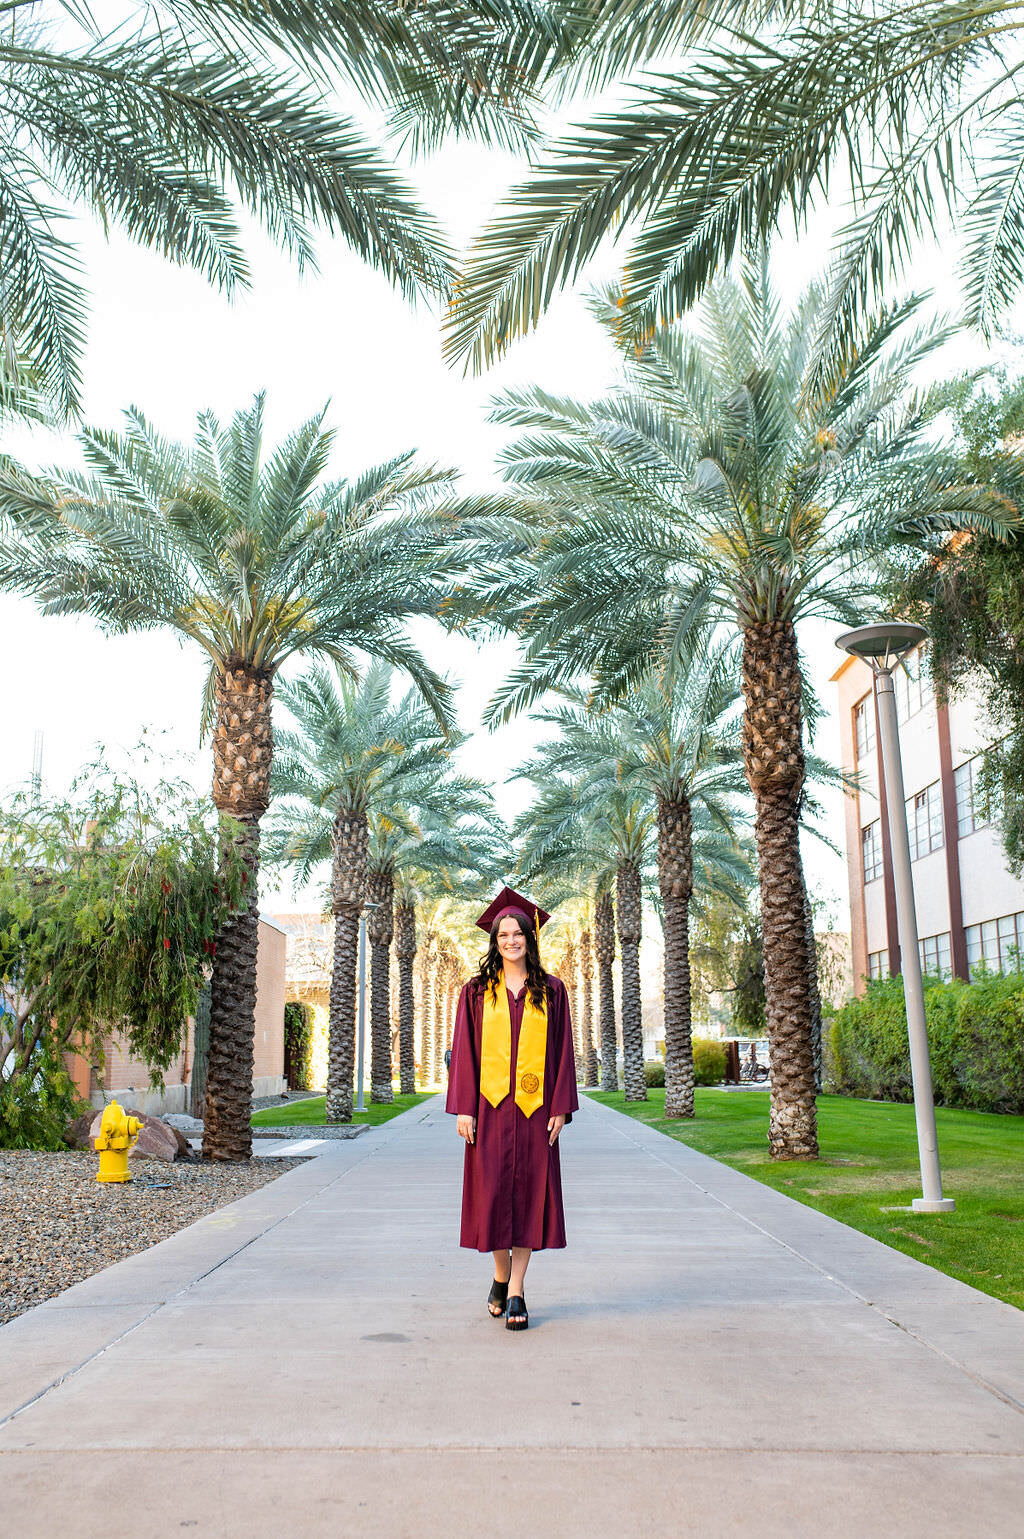 A graduate in a cap and gown walking down a path surrounded by palm trees.